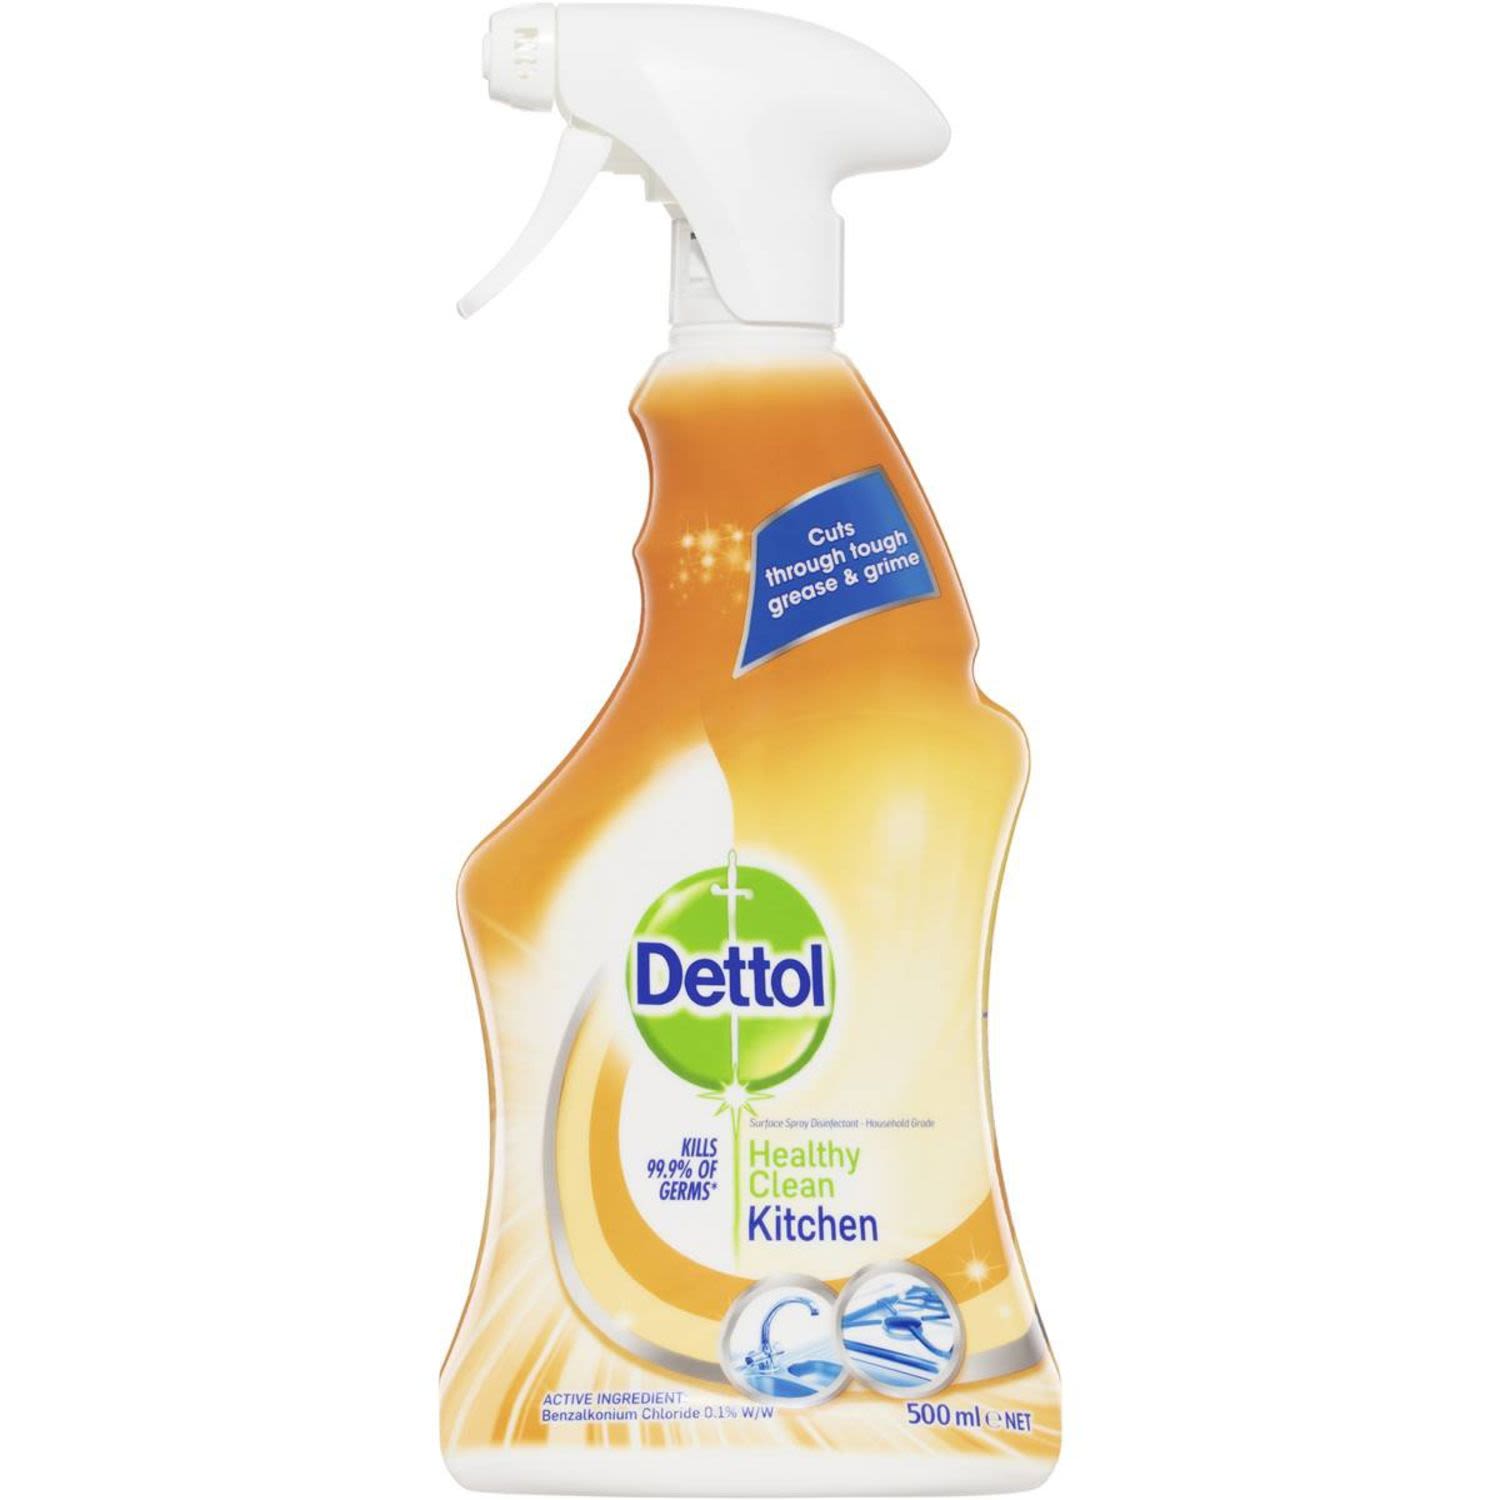 Dettol Healthy Clean Antibacterial Kitchen Cleaner Trigger Spray, 500 Millilitre